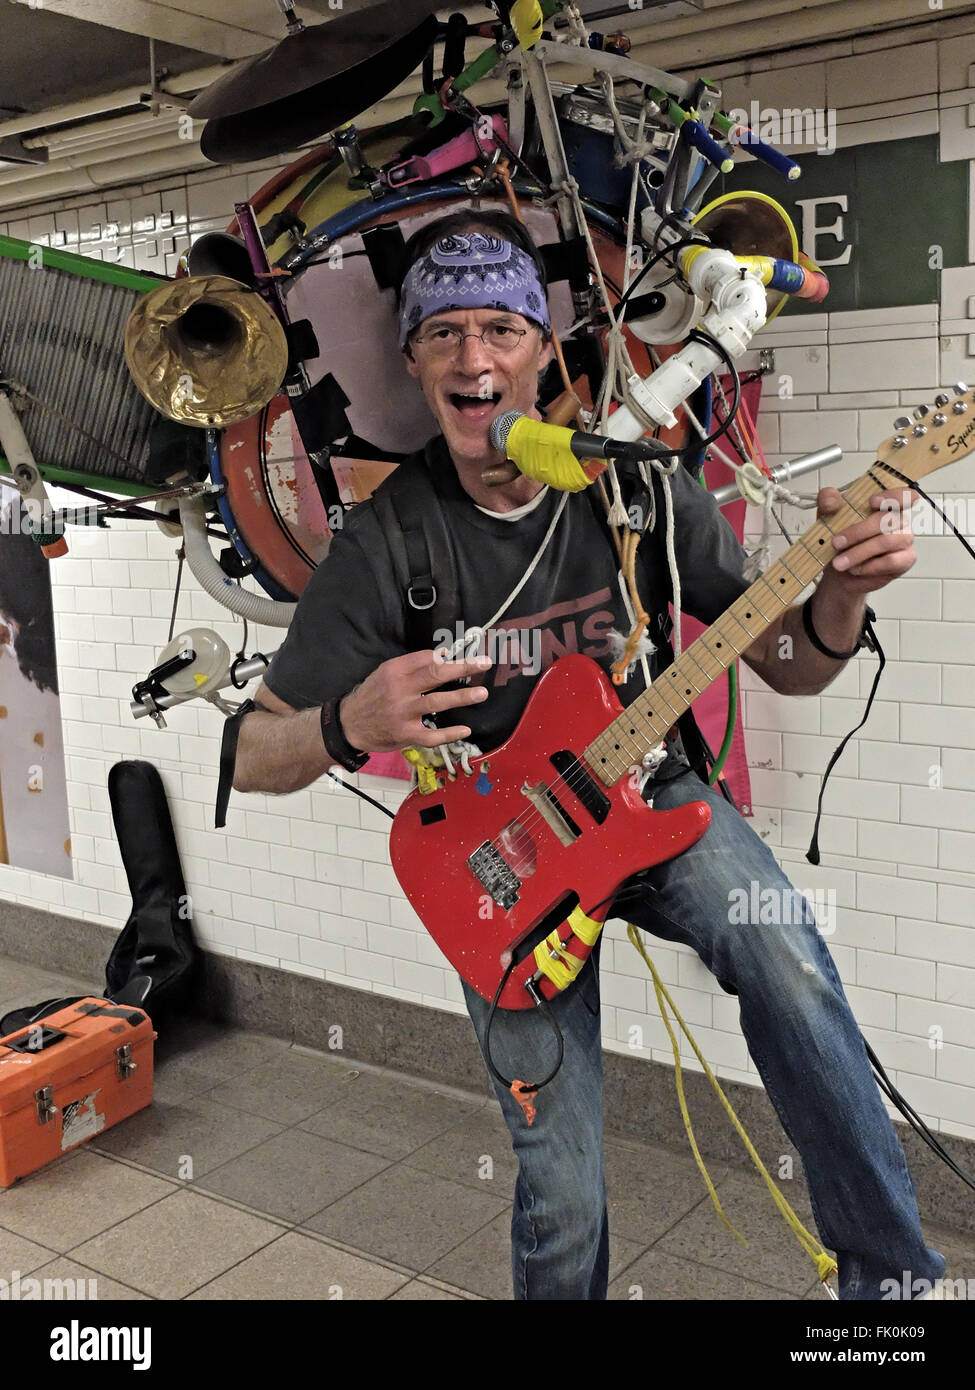 One-man band performer Jeffrey Masin performing at the Union Square subway station in Manhattan, New York City. Stock Photo